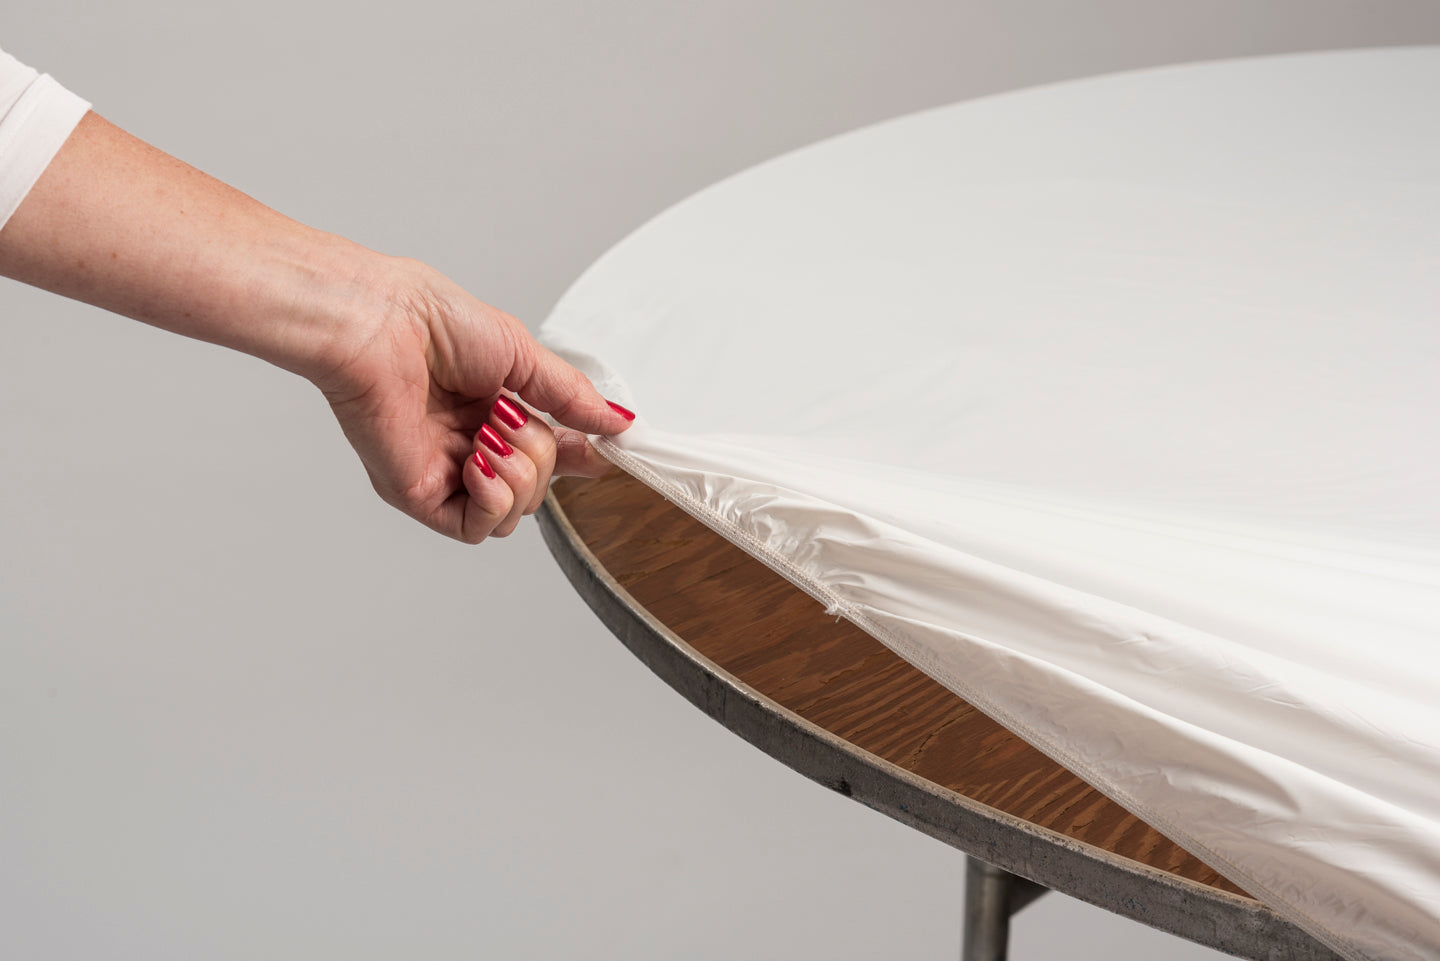 30" Round Fitted Plastic Table Covers